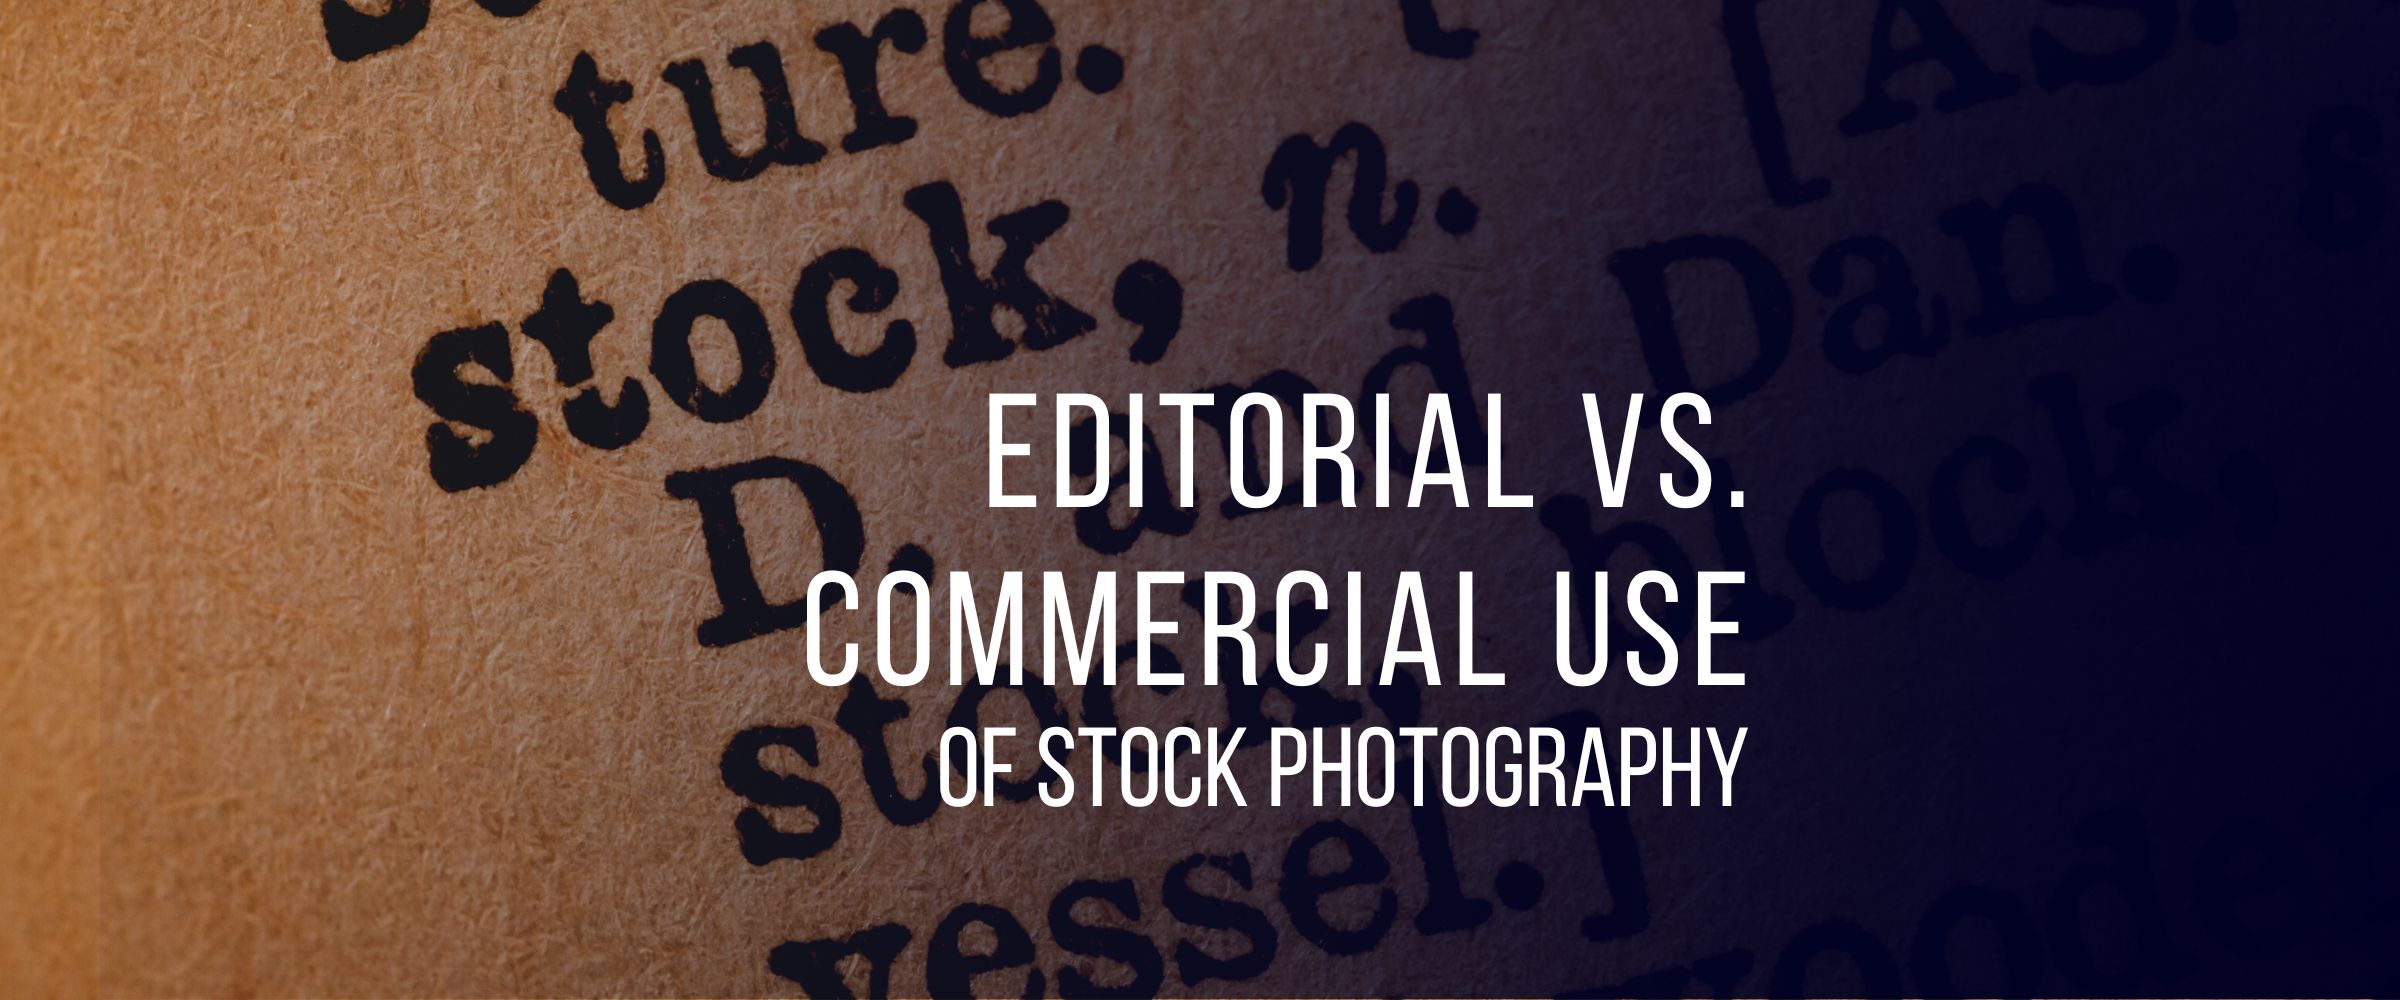 Editorial Vs Commercial Use of Stock Photography